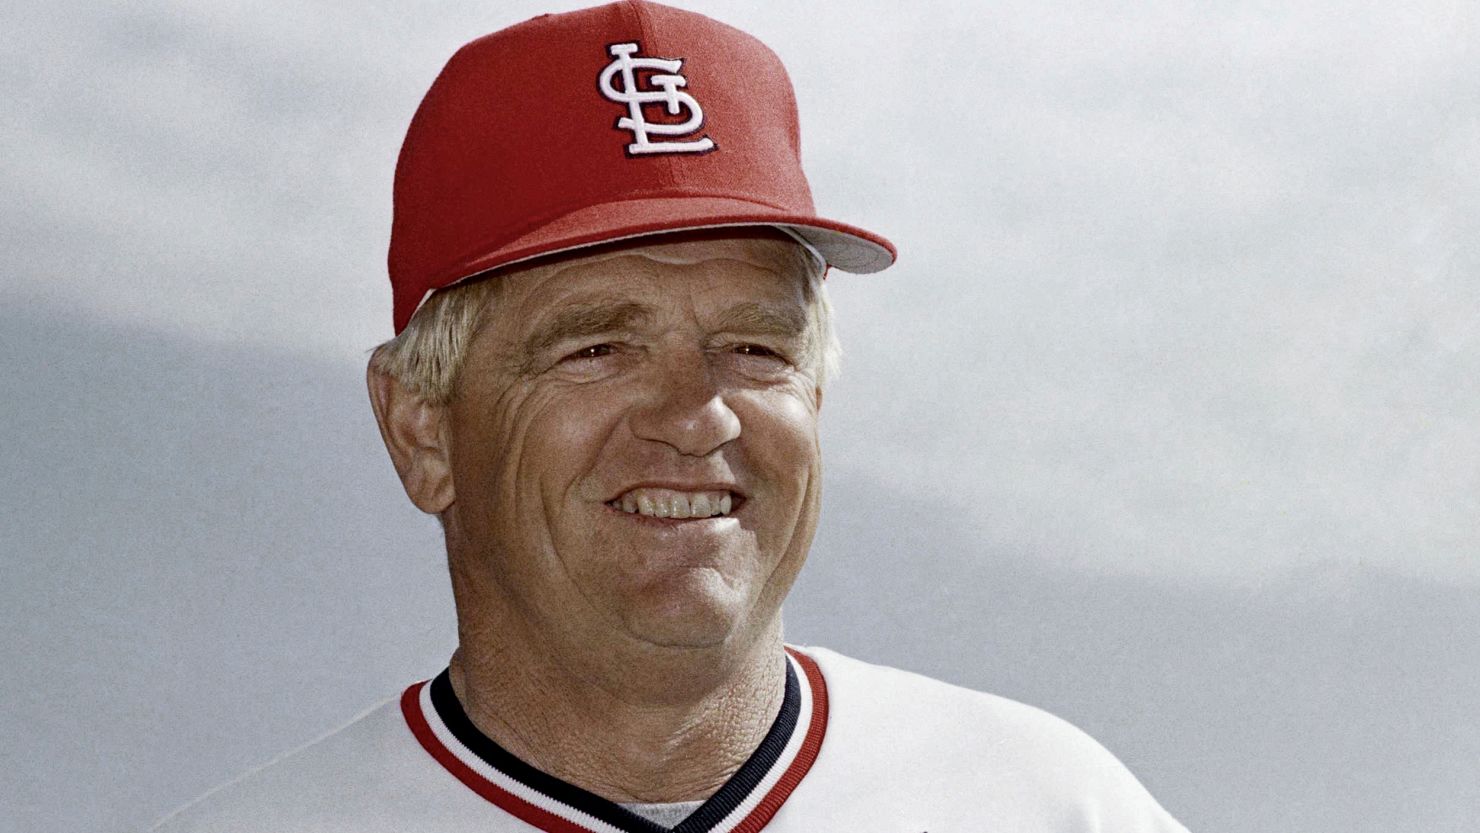 Whitey Herzog with the Cardinals in 1987, the year he led the team to its third World Series appearance in six seasons.